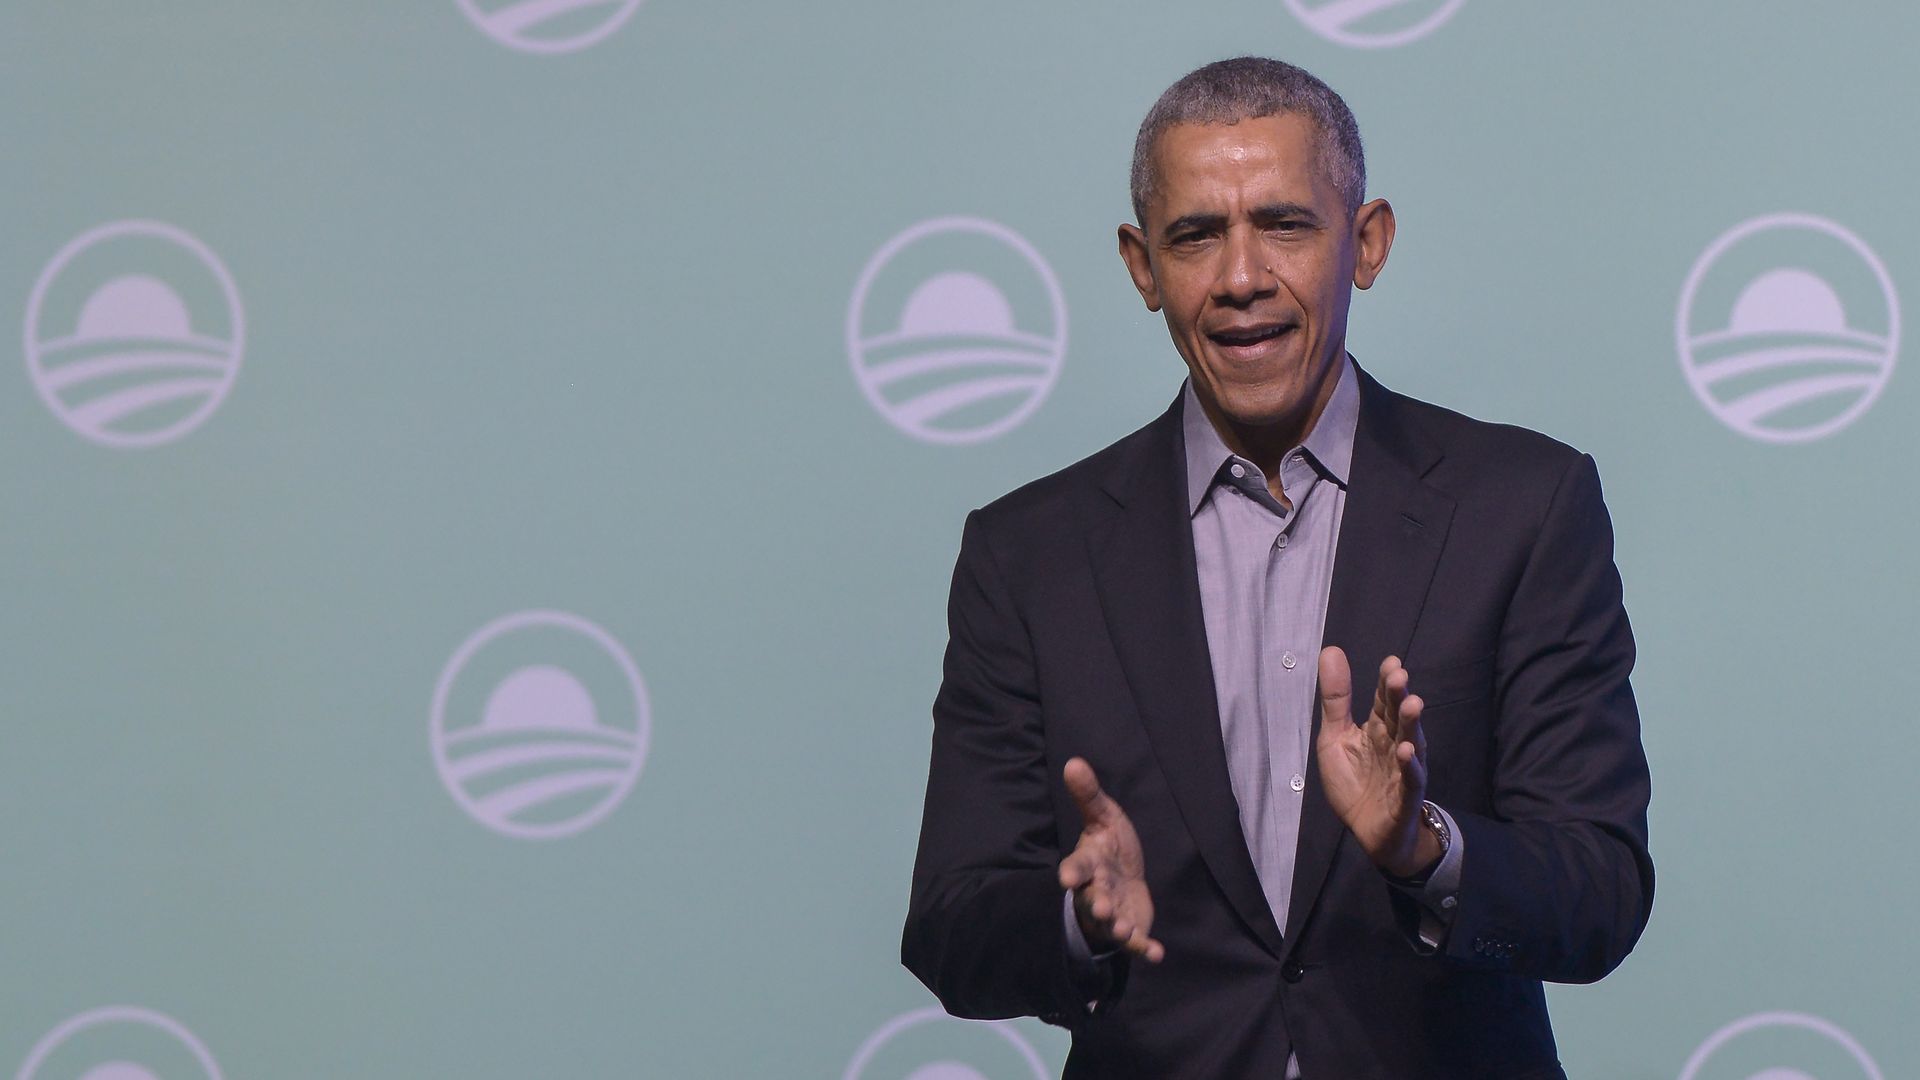 Former U.S. President Barack Obama gesture on the stage as he attends an Obama Foundation event